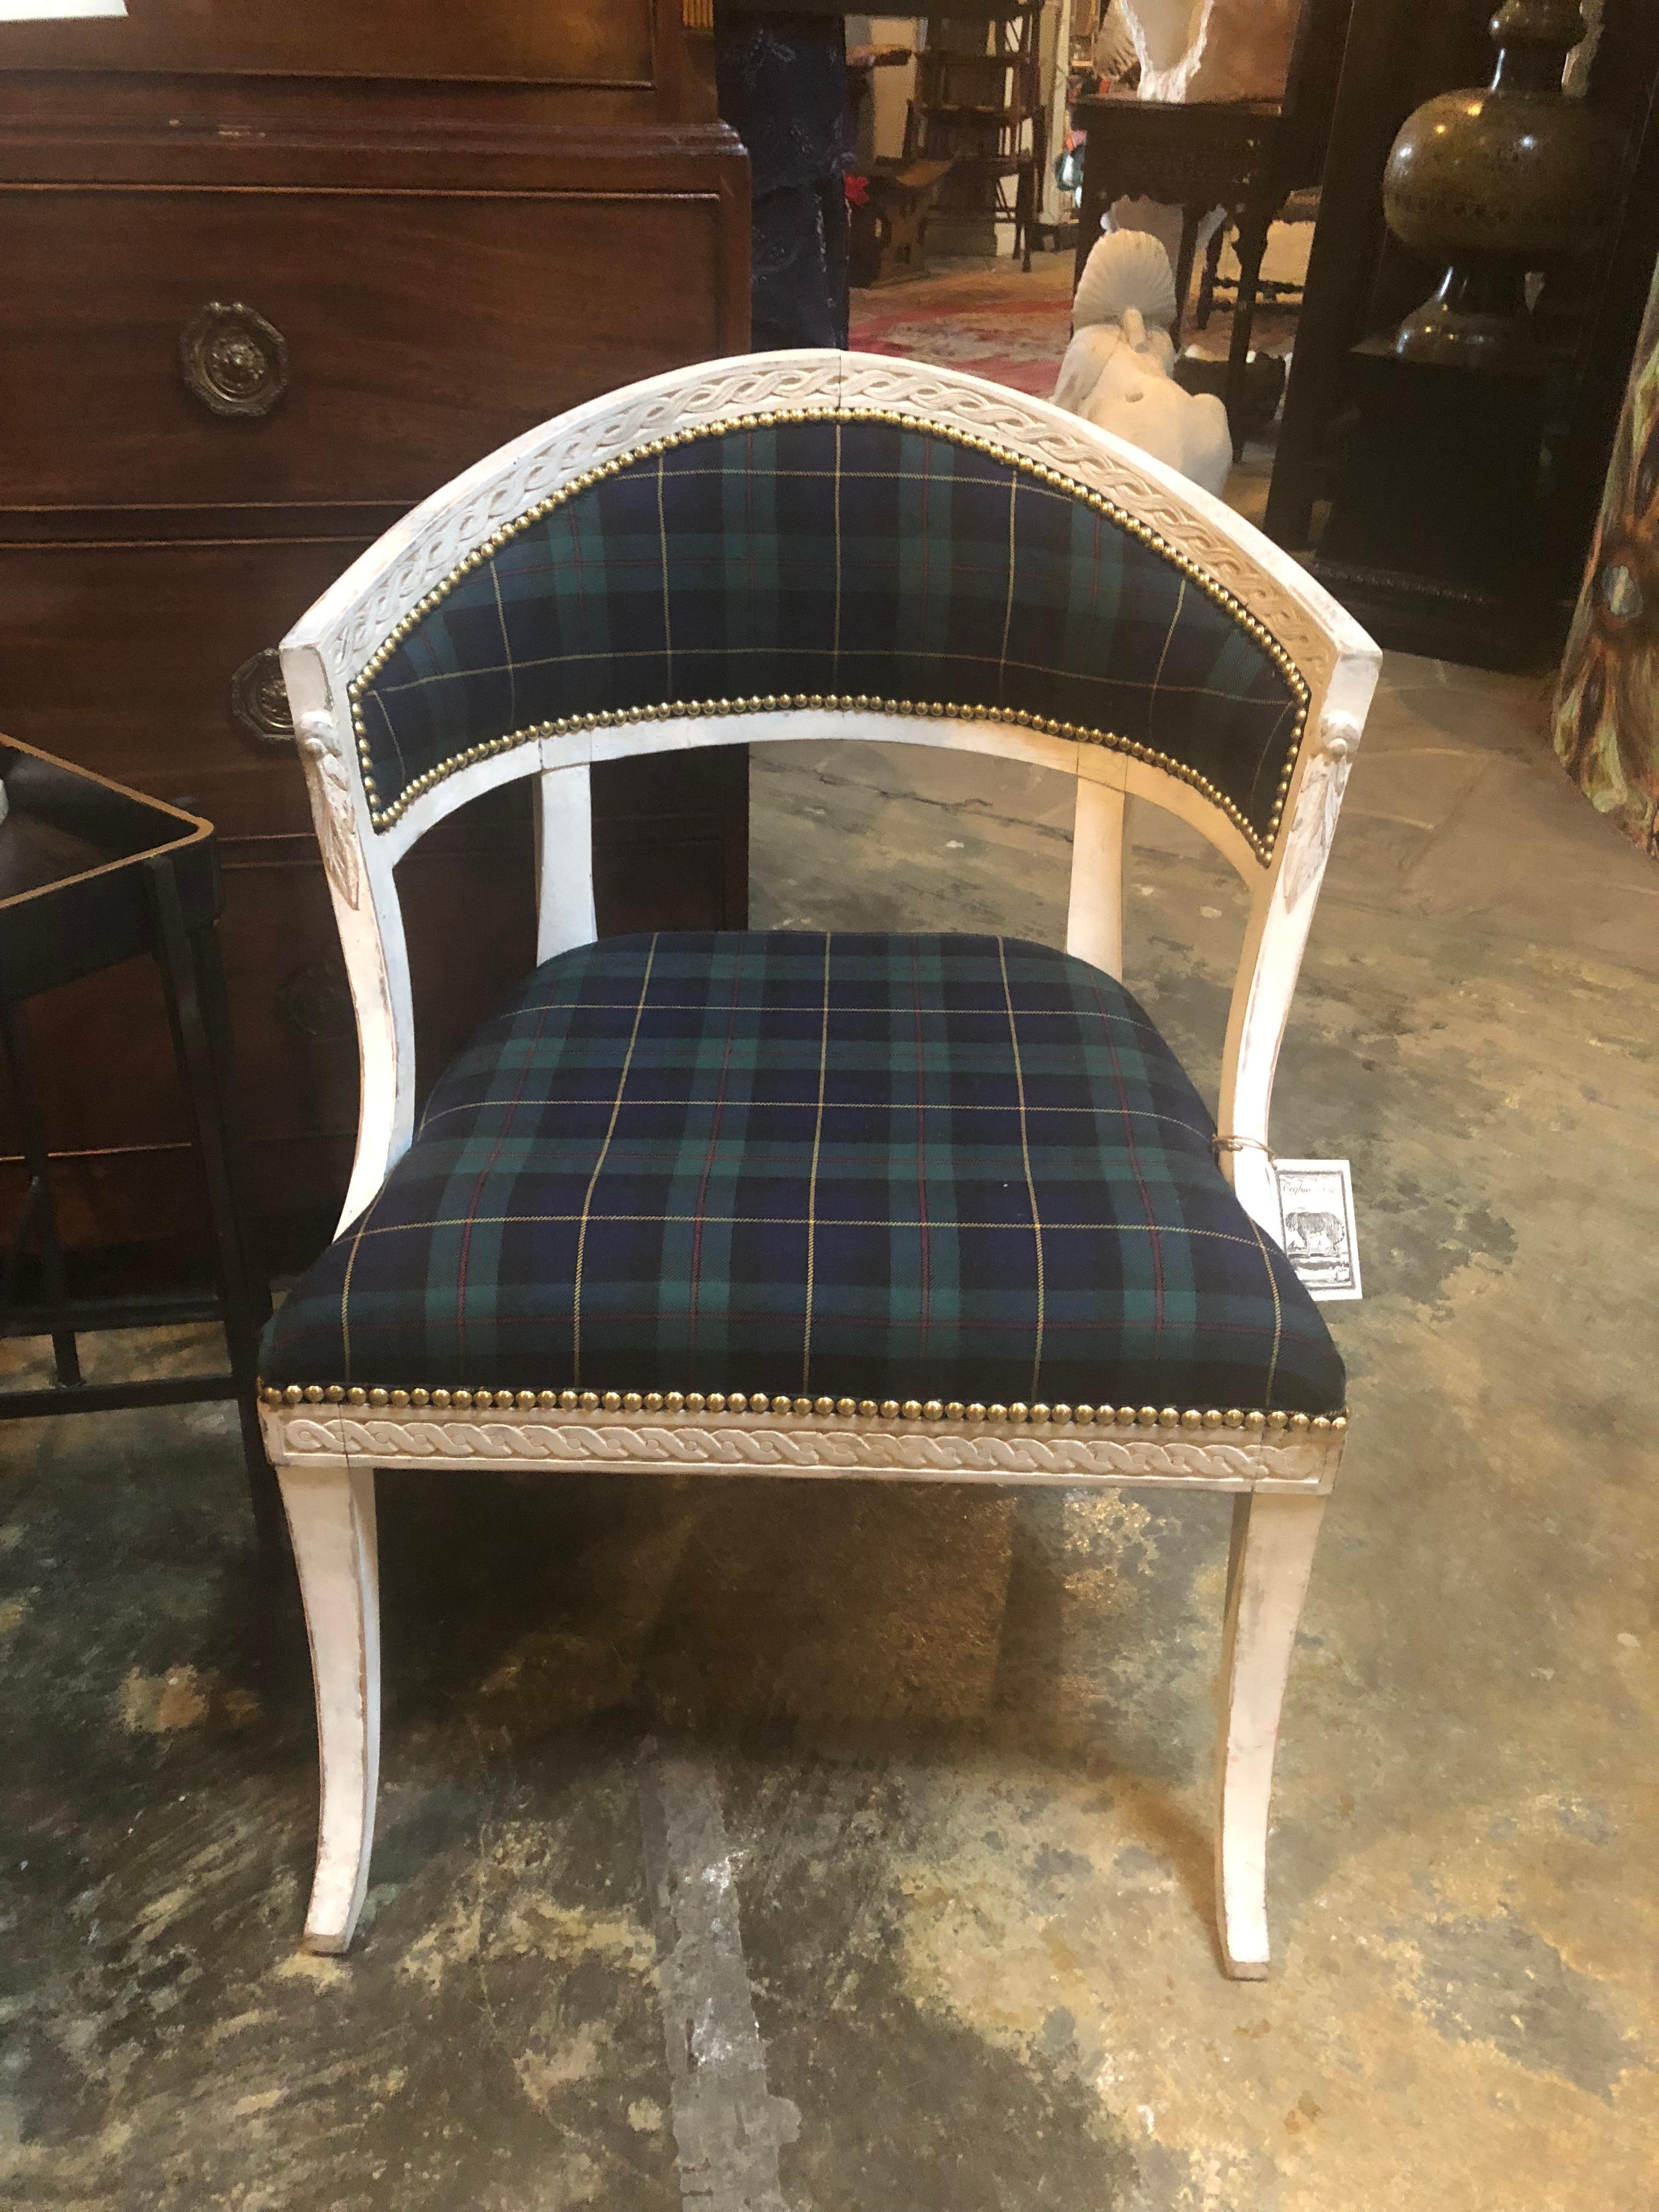 Pair of vintage Regency style chairs. Wood designed with a white wash finish. Nailhead along the chair. Upholstered in Ralph Lauren plaid wool fabric.